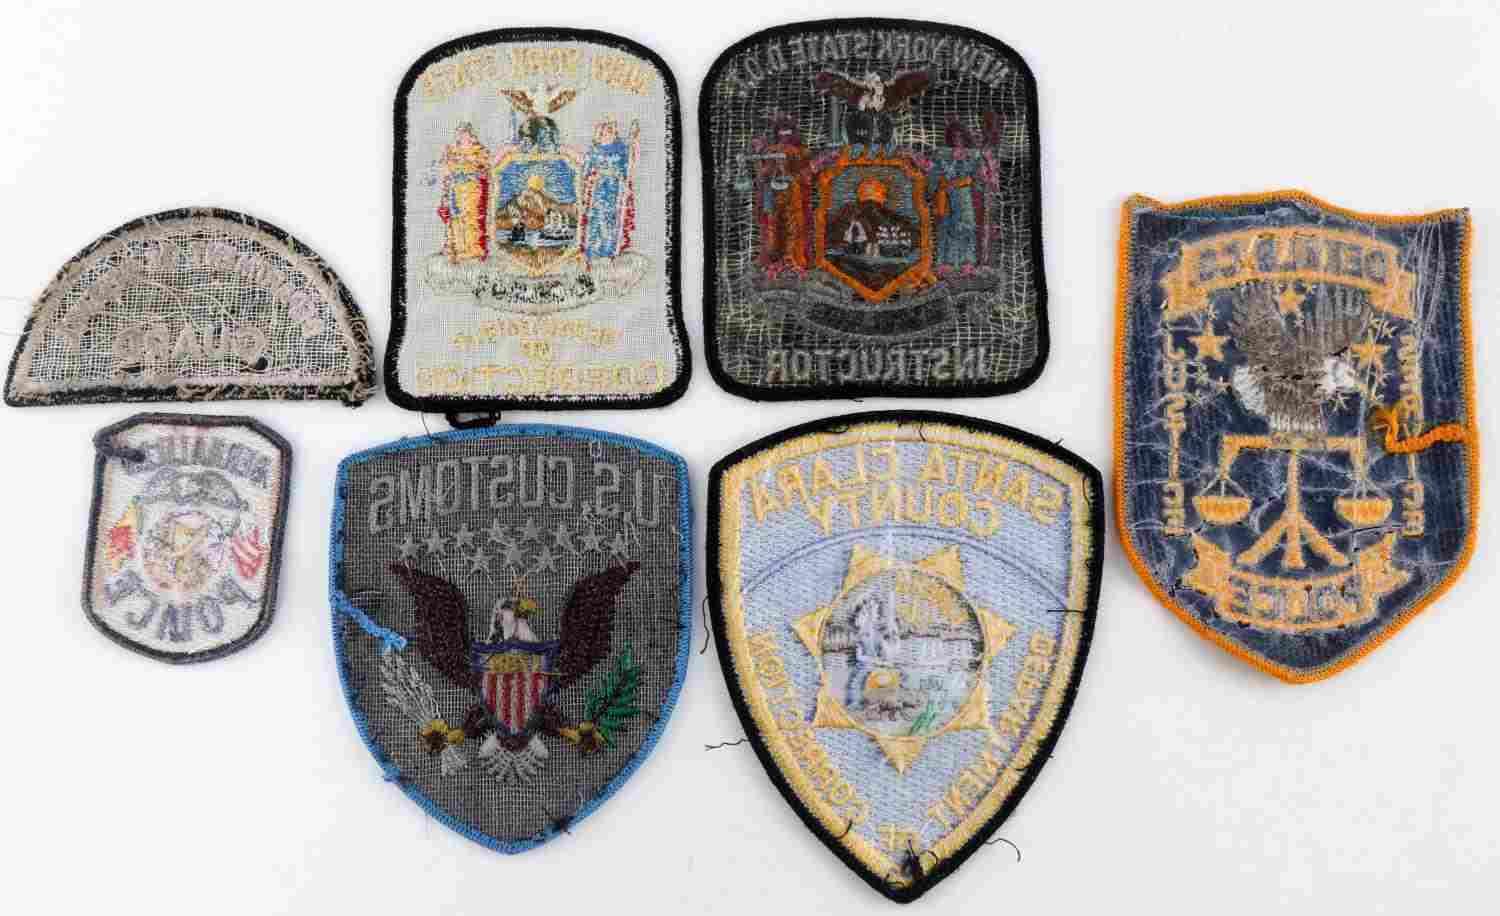 LOT OF SEVEN VARIOUS POLICE BADGE PATCHES